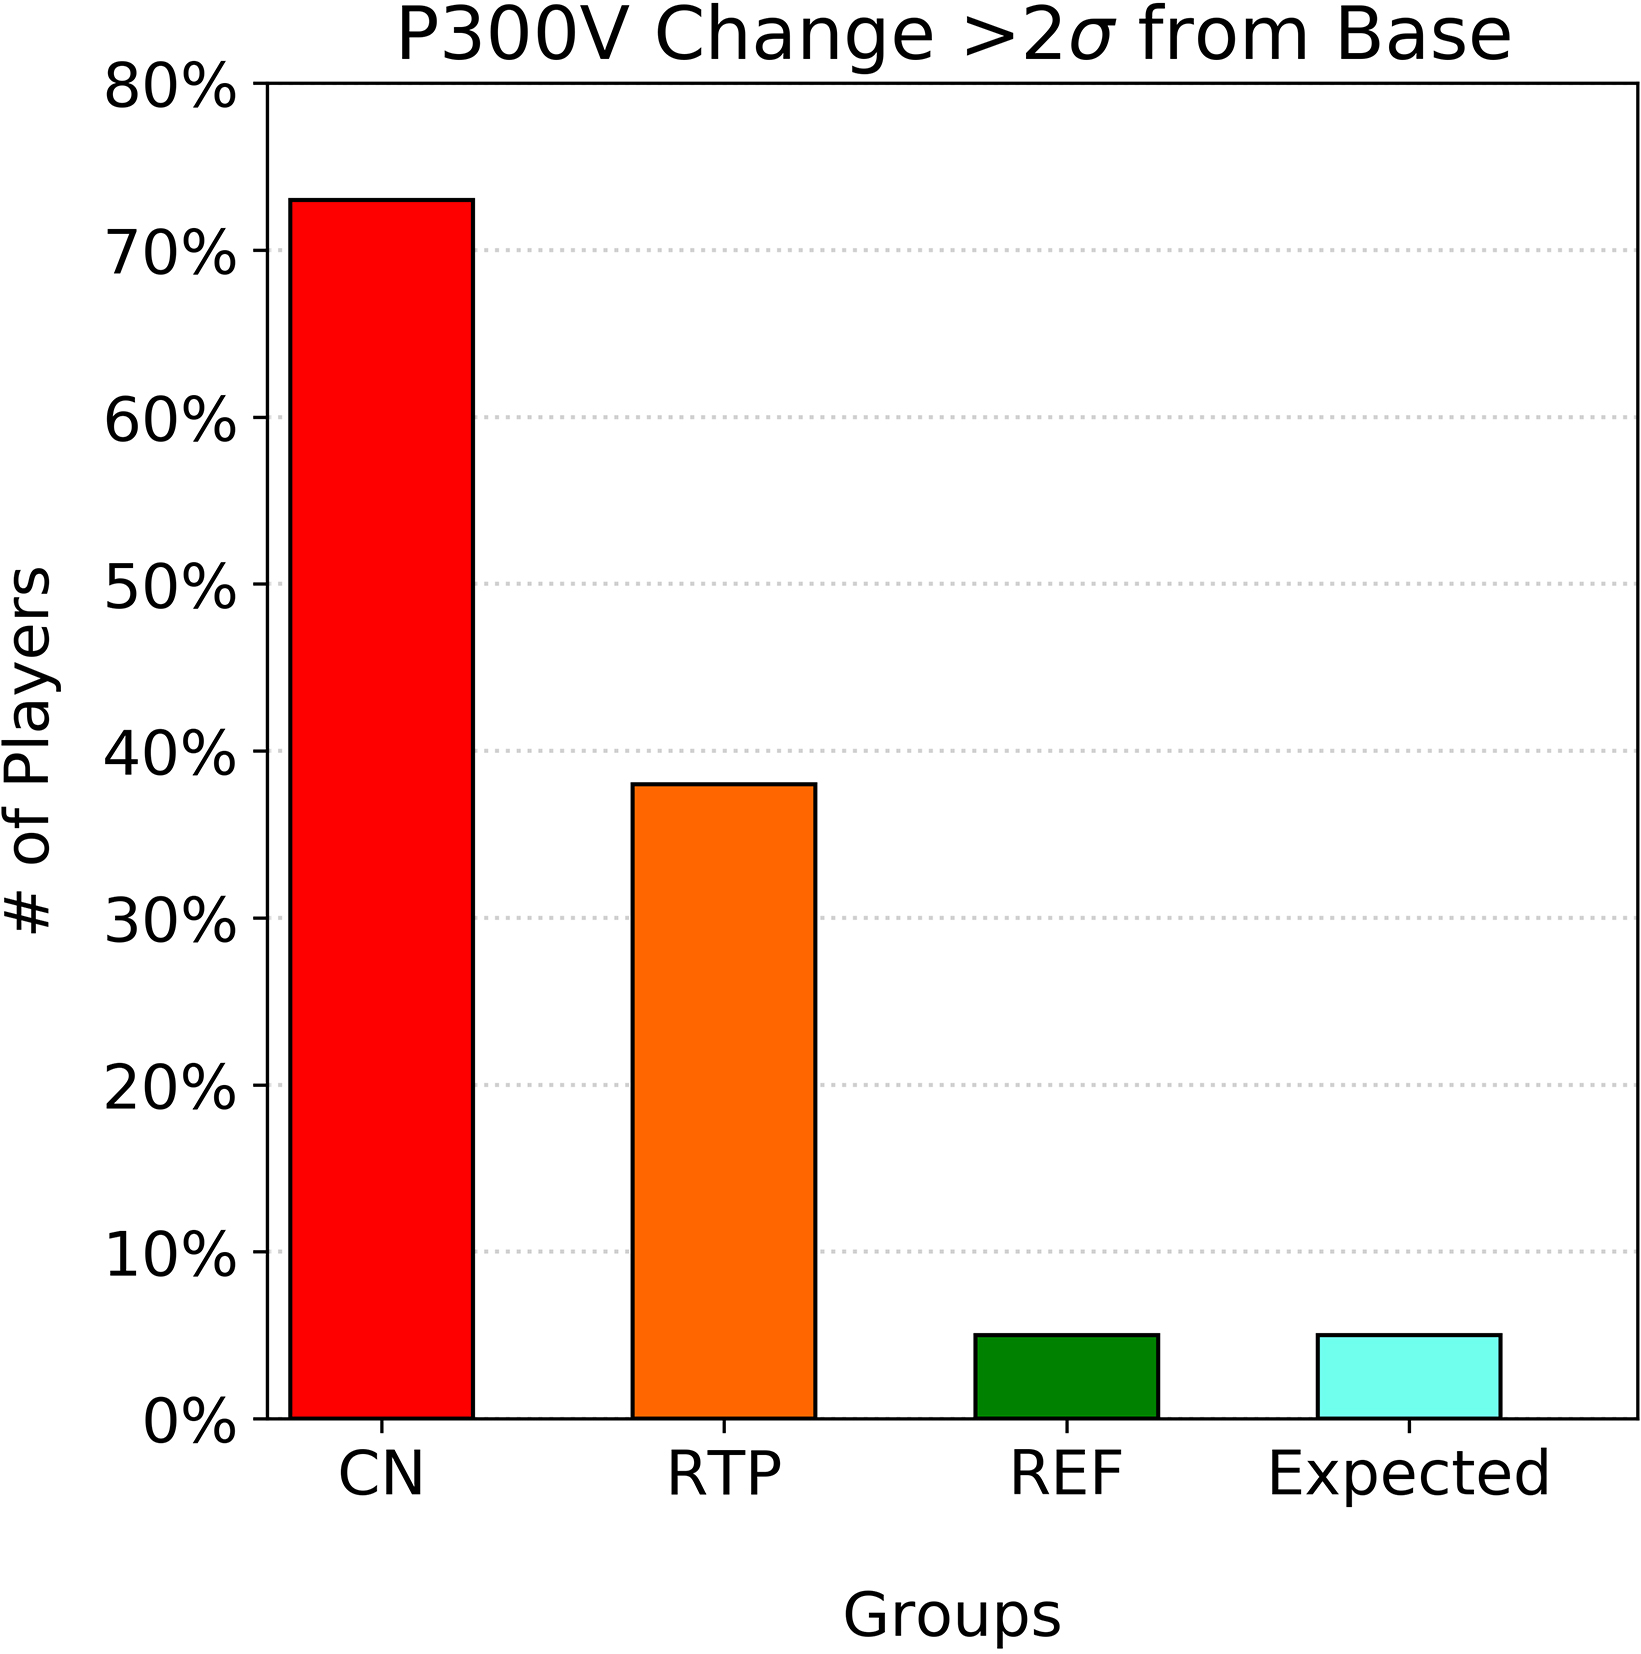 Number of players showing greater than ±40% P300 voltage change from baseline for CN, CRTP, and non-concussed REF groups. Figure shows lingering P300 changes at CRTP.